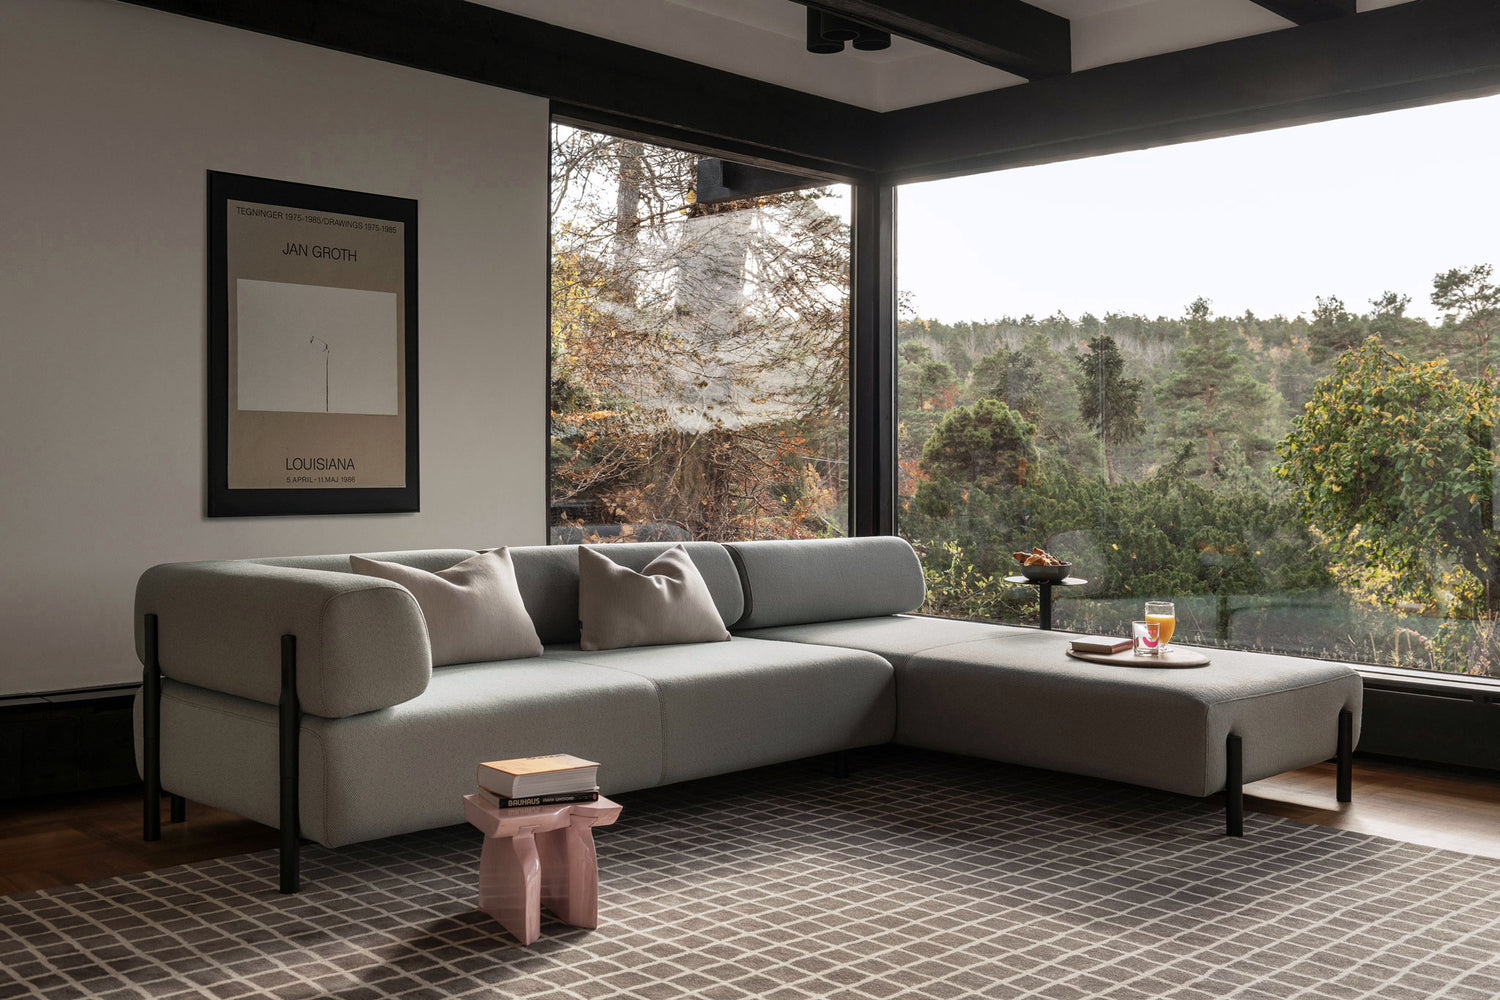 A living room scene featuring a Palo Modular Corner Sofa Right in Beige above a Grid Rug.